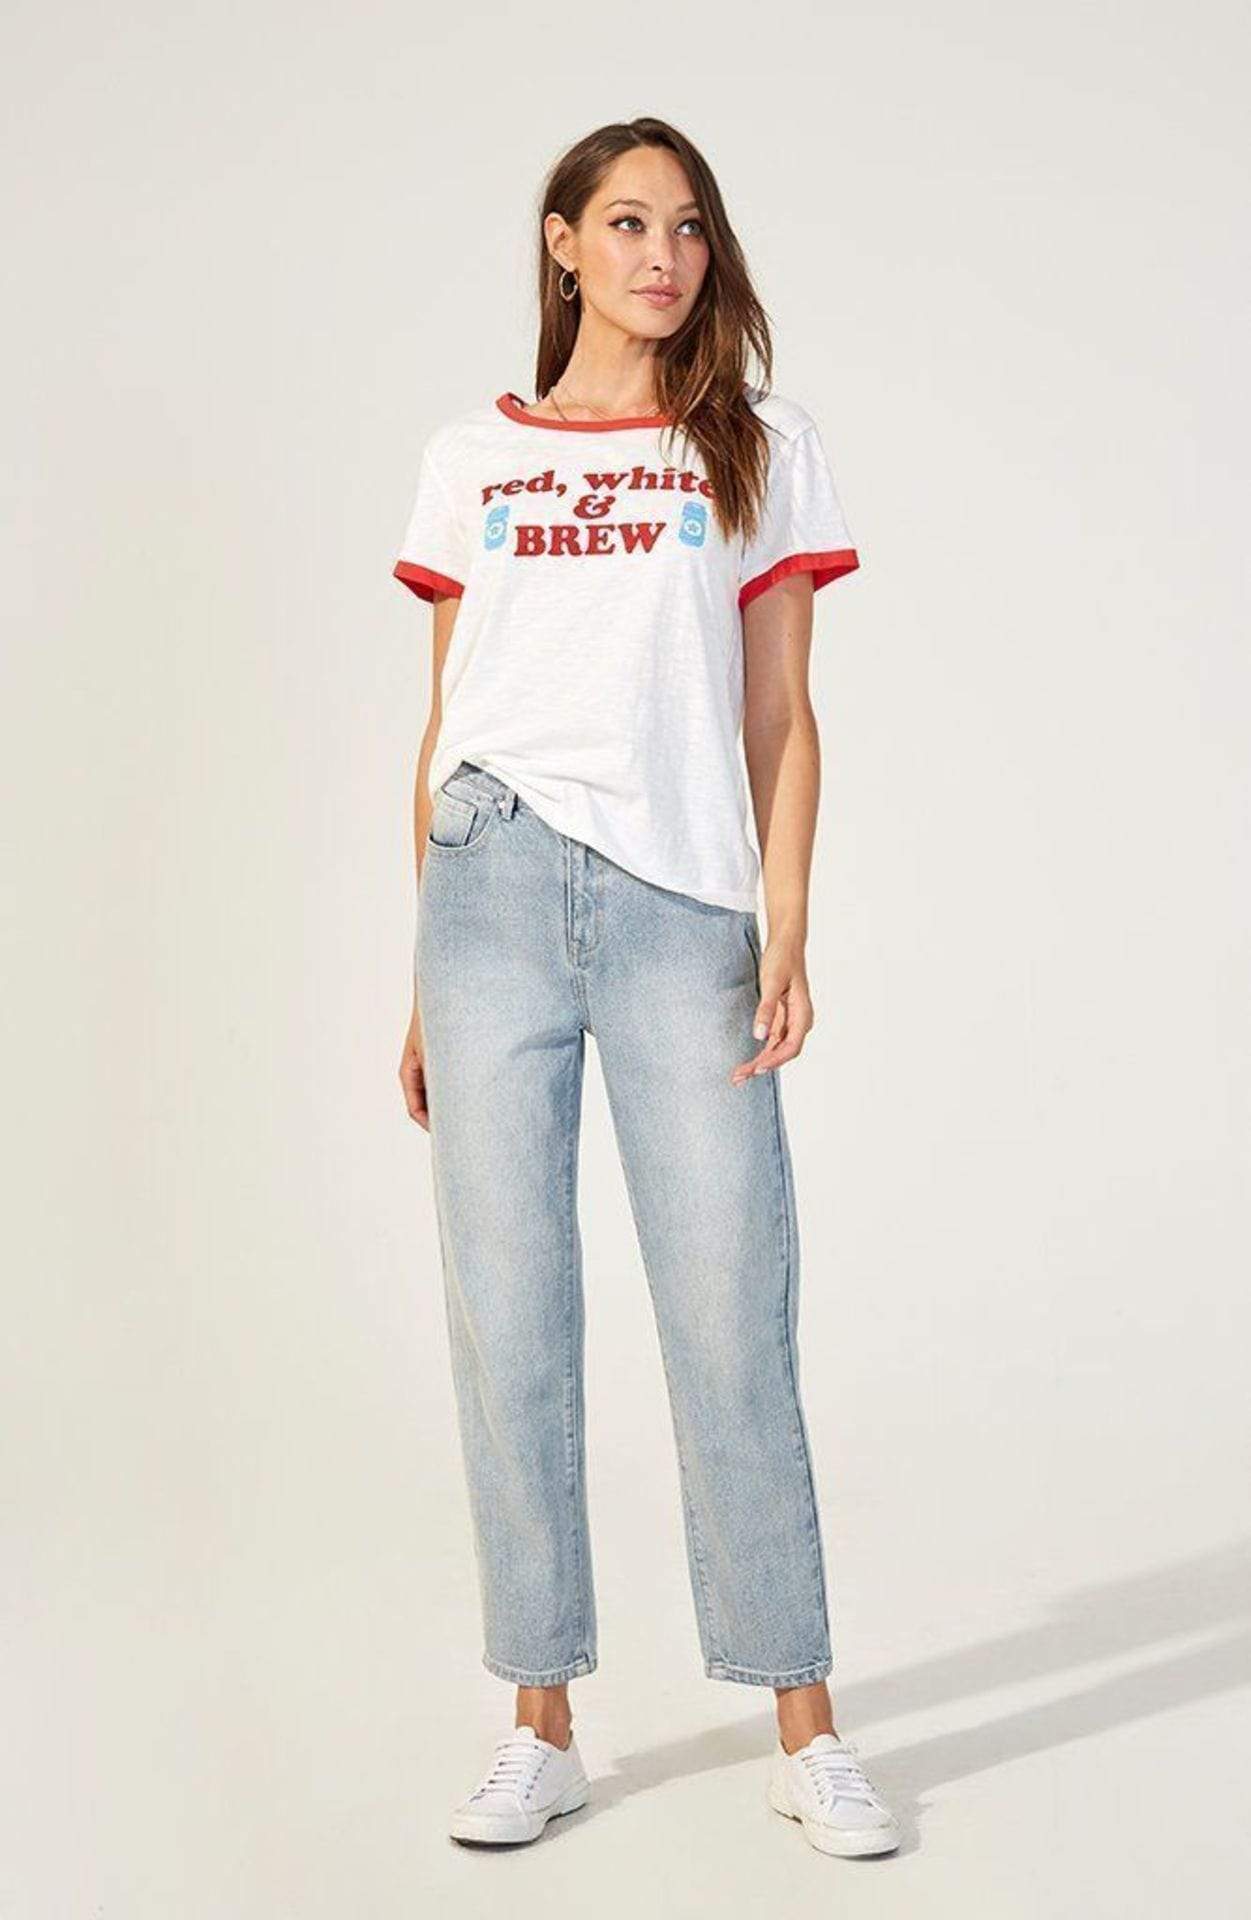 Red White and Brew Tee White, Short Tee by Mink Pink | LIT Boutique